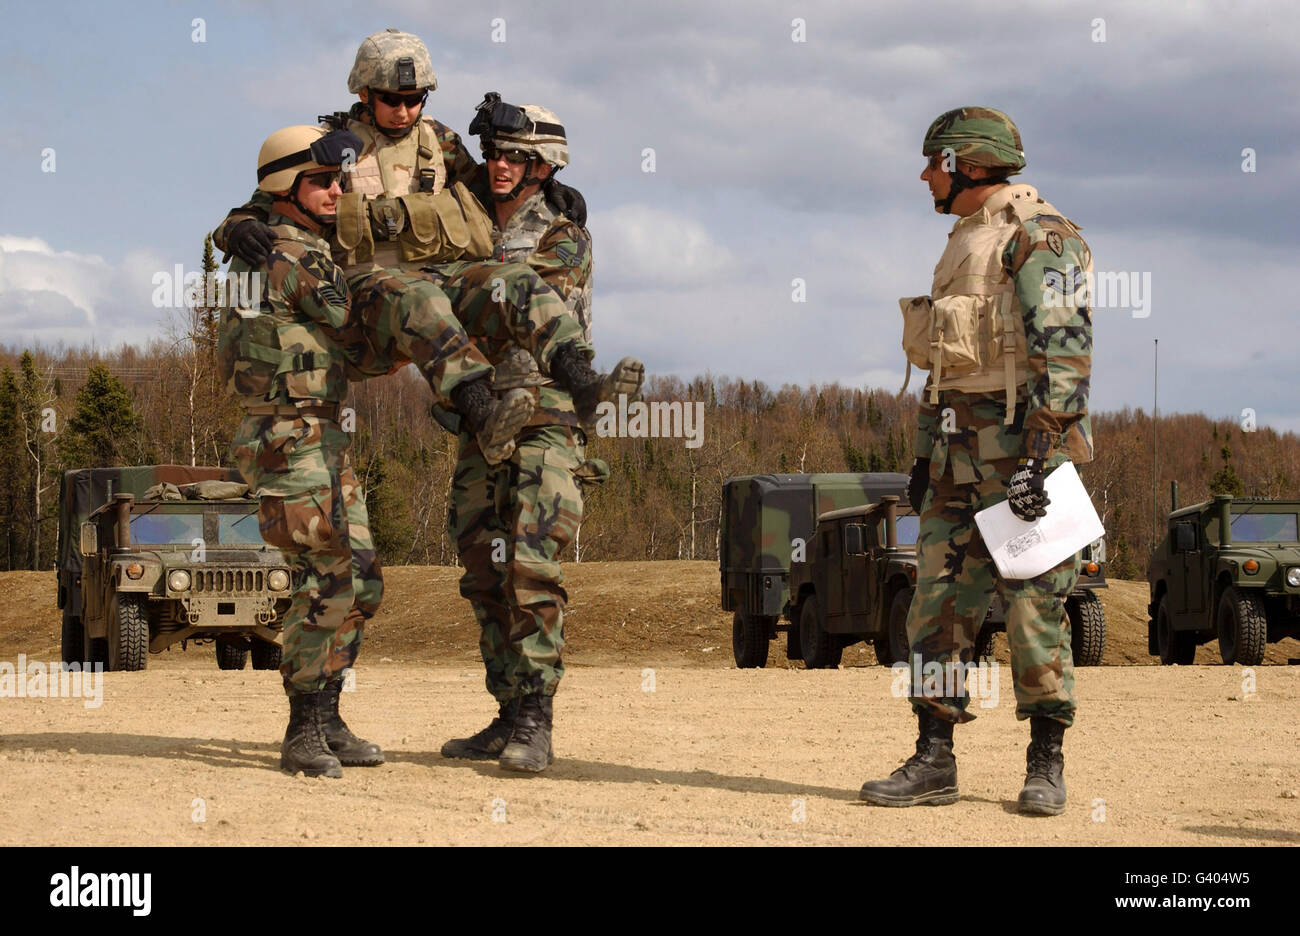 Soldiers demonstrate the four-handed seat-carry during self-aid buddy care training. Stock Photo